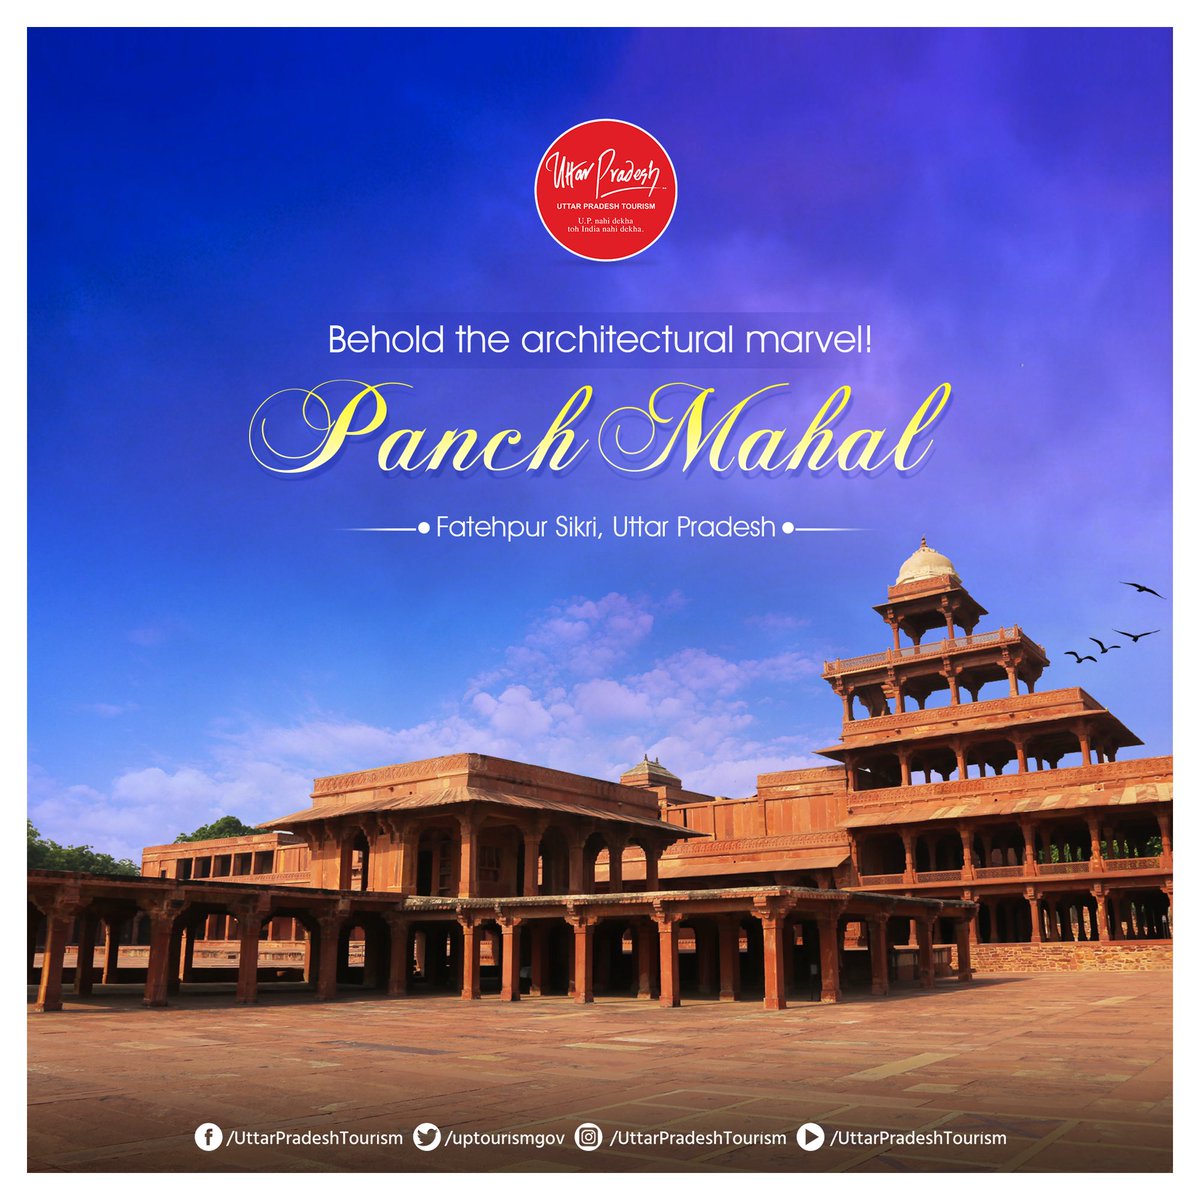 This stunning red-sandstone monument, with its five gracefully diminishing storeys, stands tall as a must-visit attraction for tourists. Each floor, meticulously crafted, adds to the allure of this columnar wonder. Have you visited here before?

#PanchMahal #FatehpurSikri